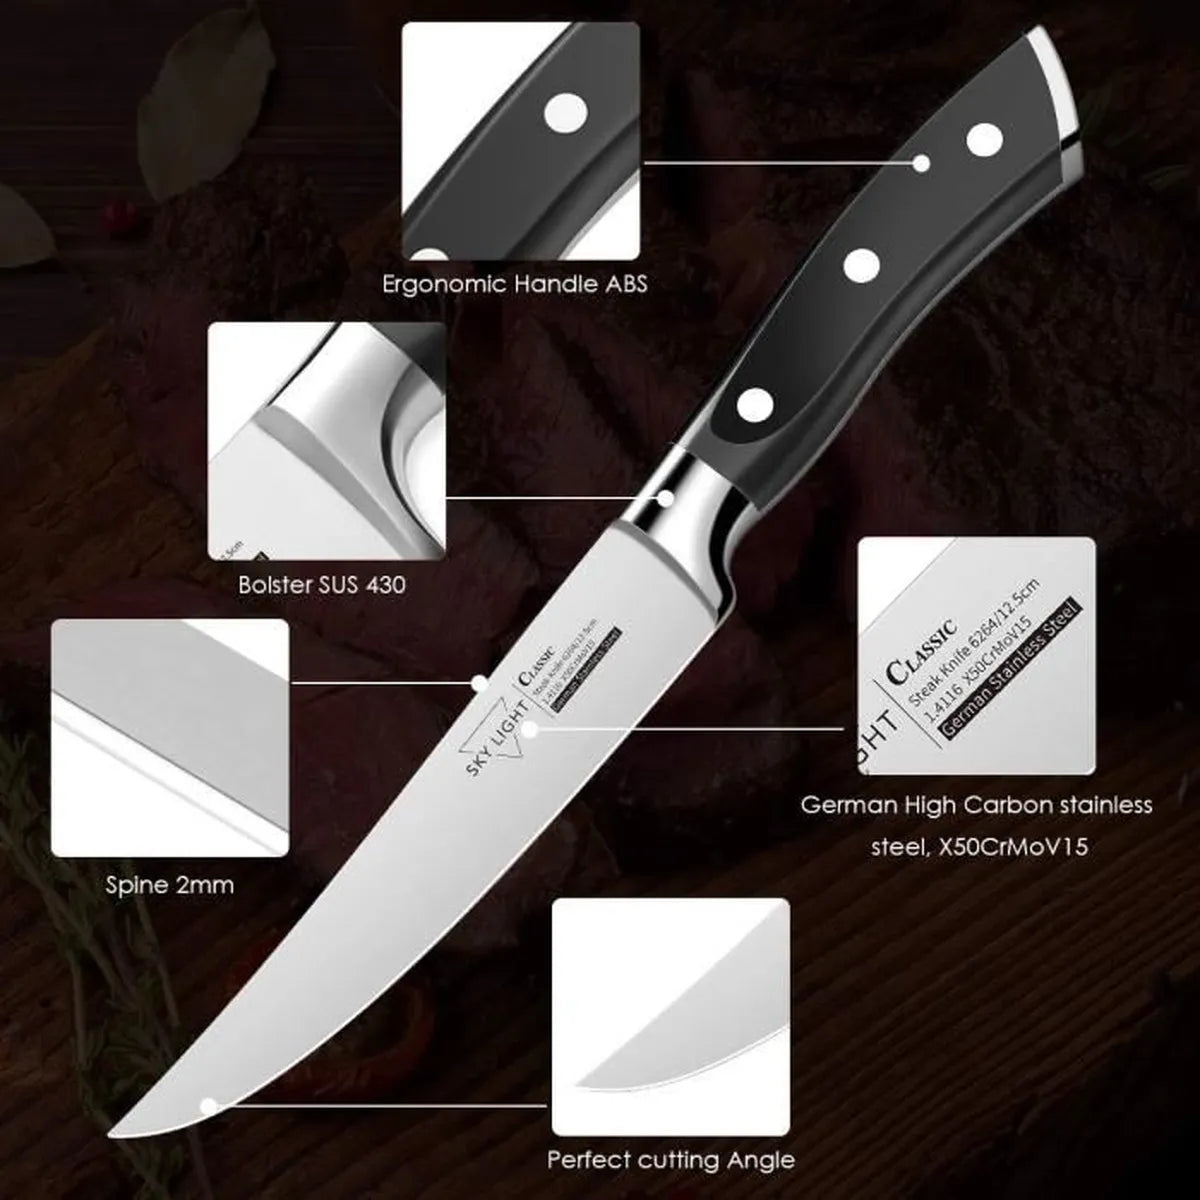 SKY LIGHT Steak Knives Set 12cm Table Knives, Non-Serrated Stainless Steel Blade and Ergonomic Handle for Kitchen 6264